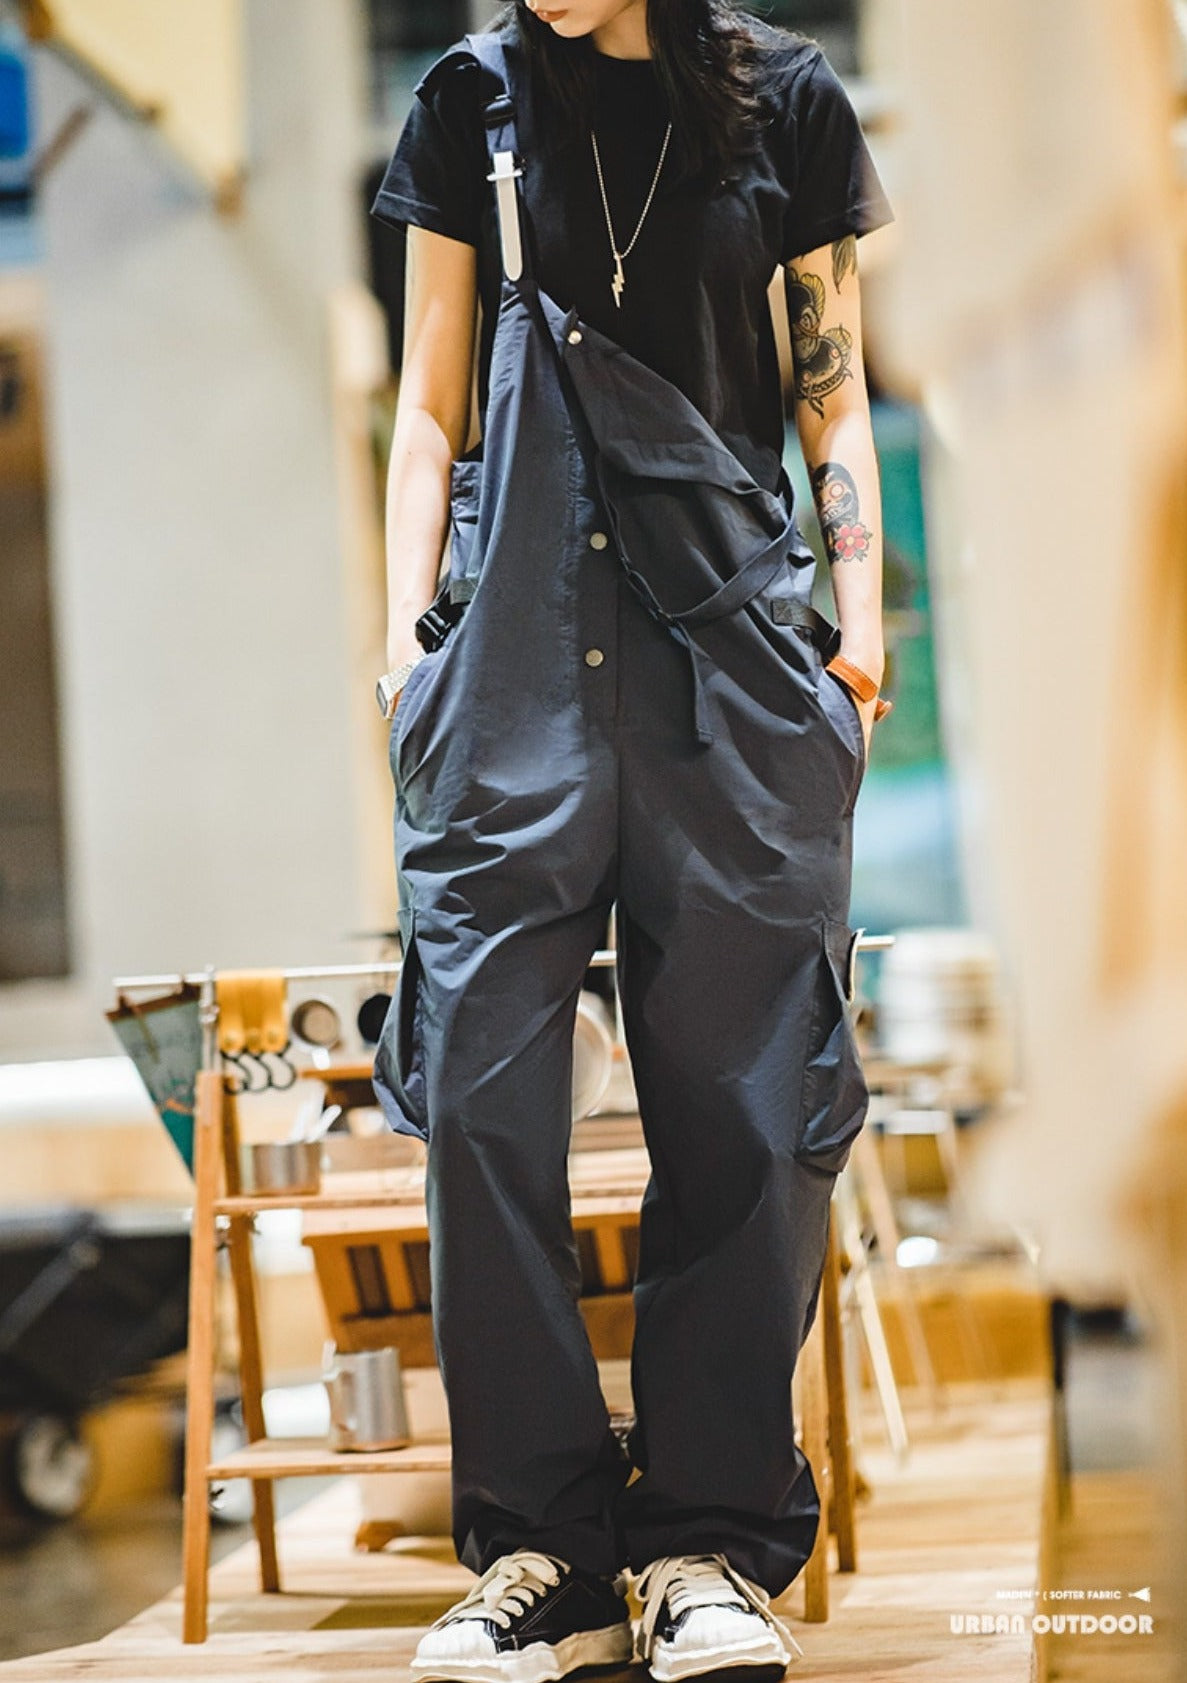 Maden New Arrival American Vintage Cargo Overalls for Women Casual Style Wide Leg Trousers with Large Pocket Waterproof Pants